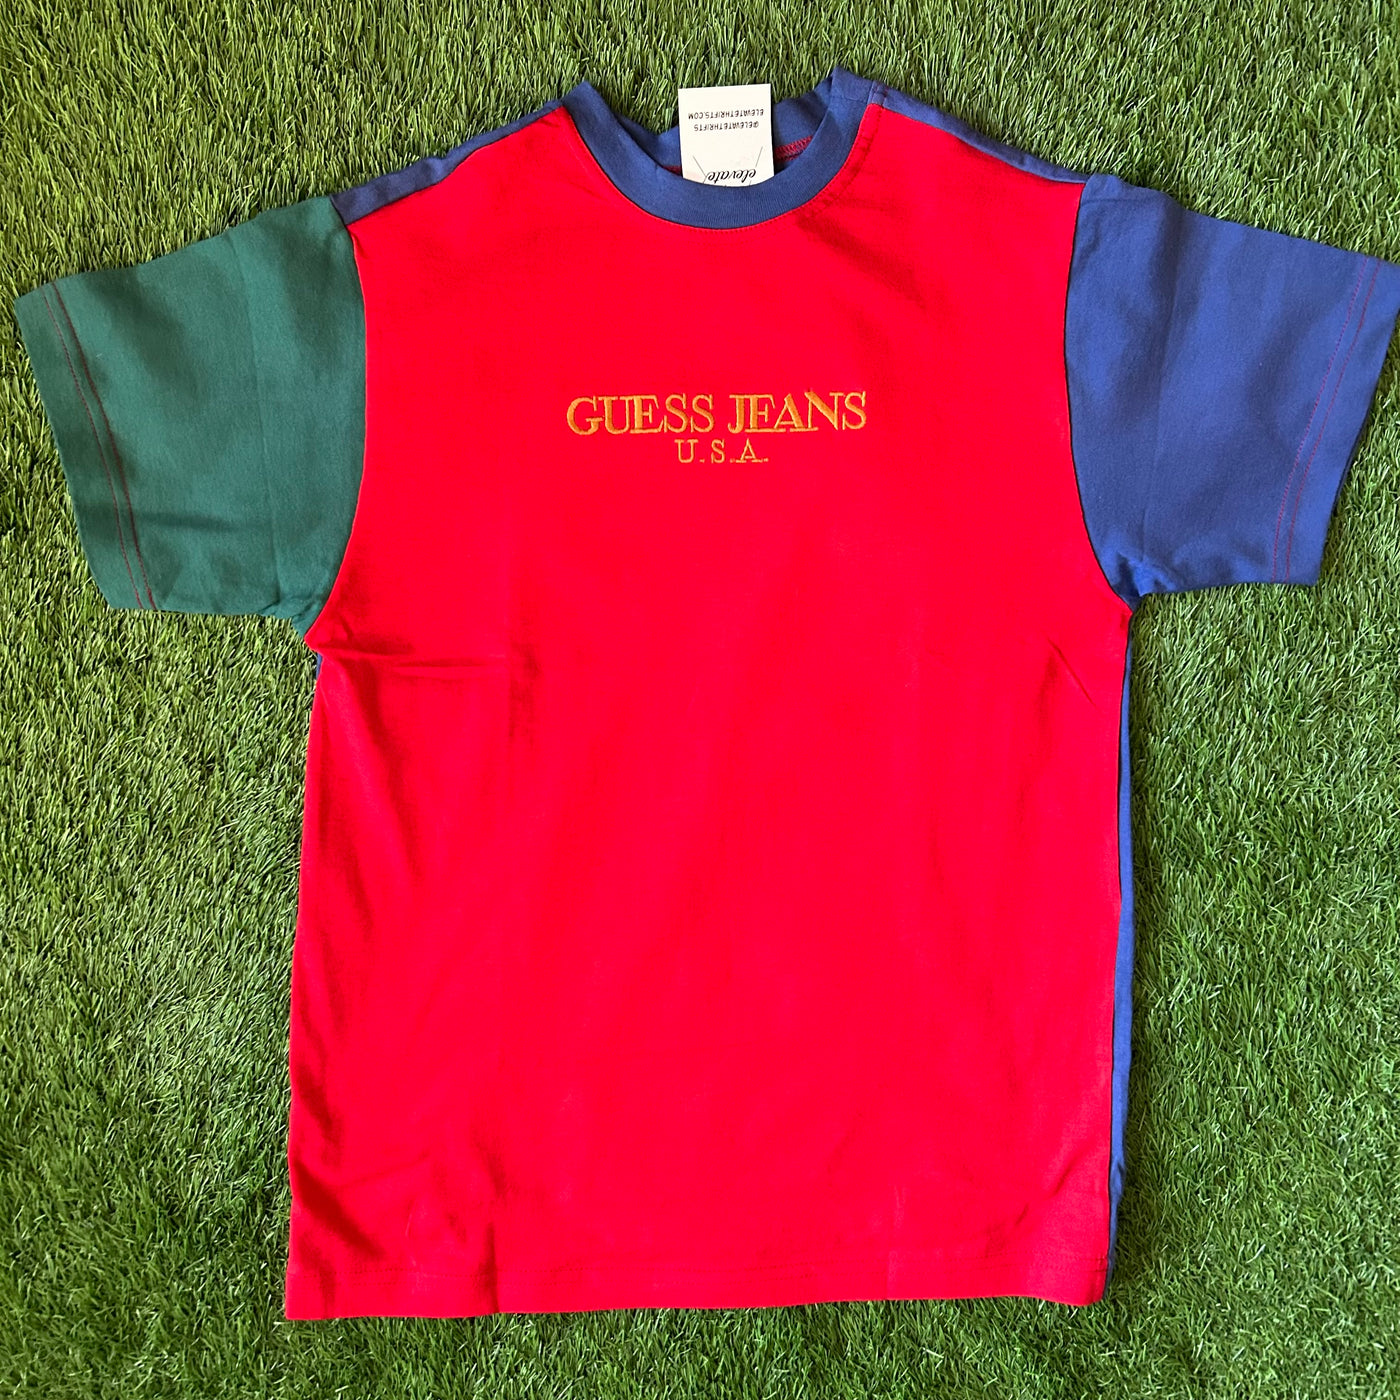 Tri-Color Guess Tee